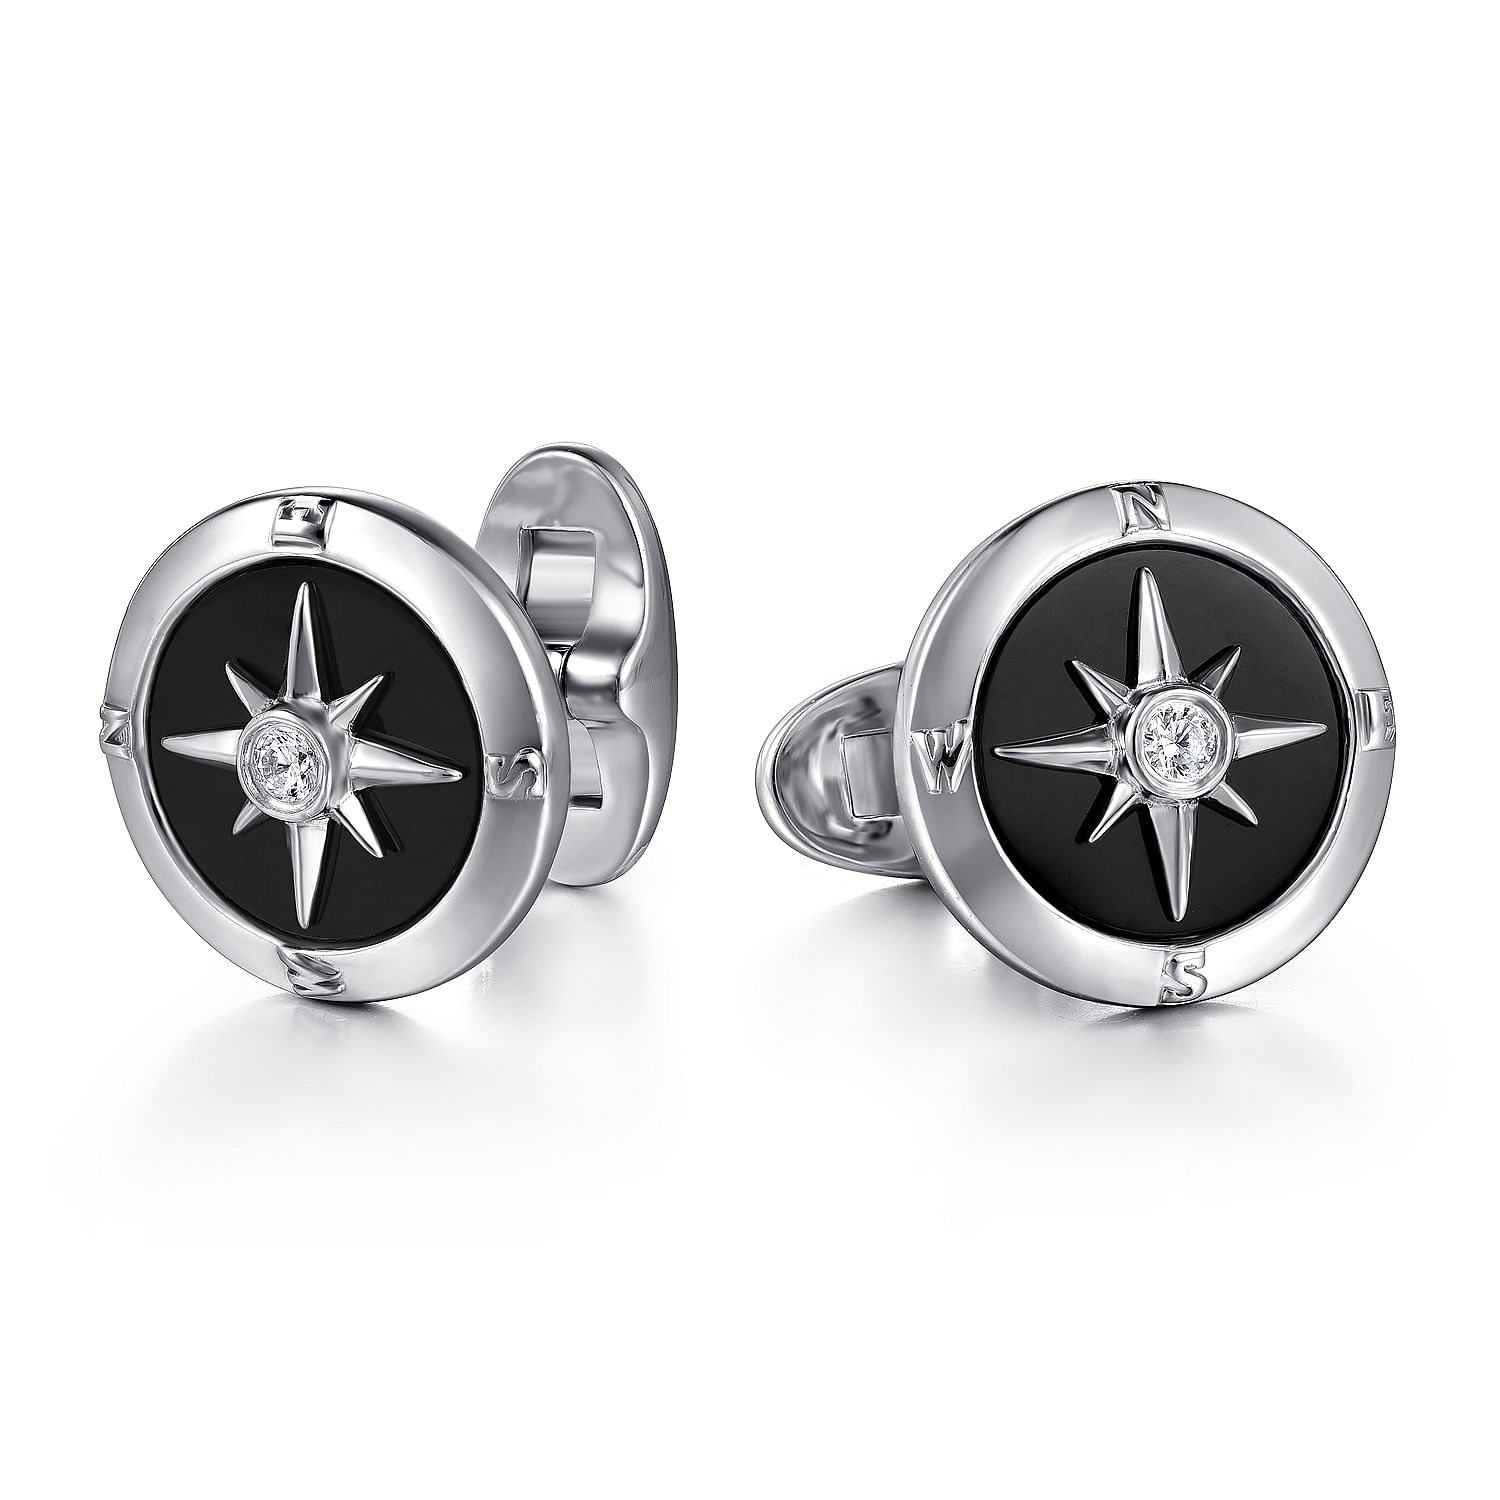 925 Sterling Silver Round Cufflinks with Diamond and Onyx